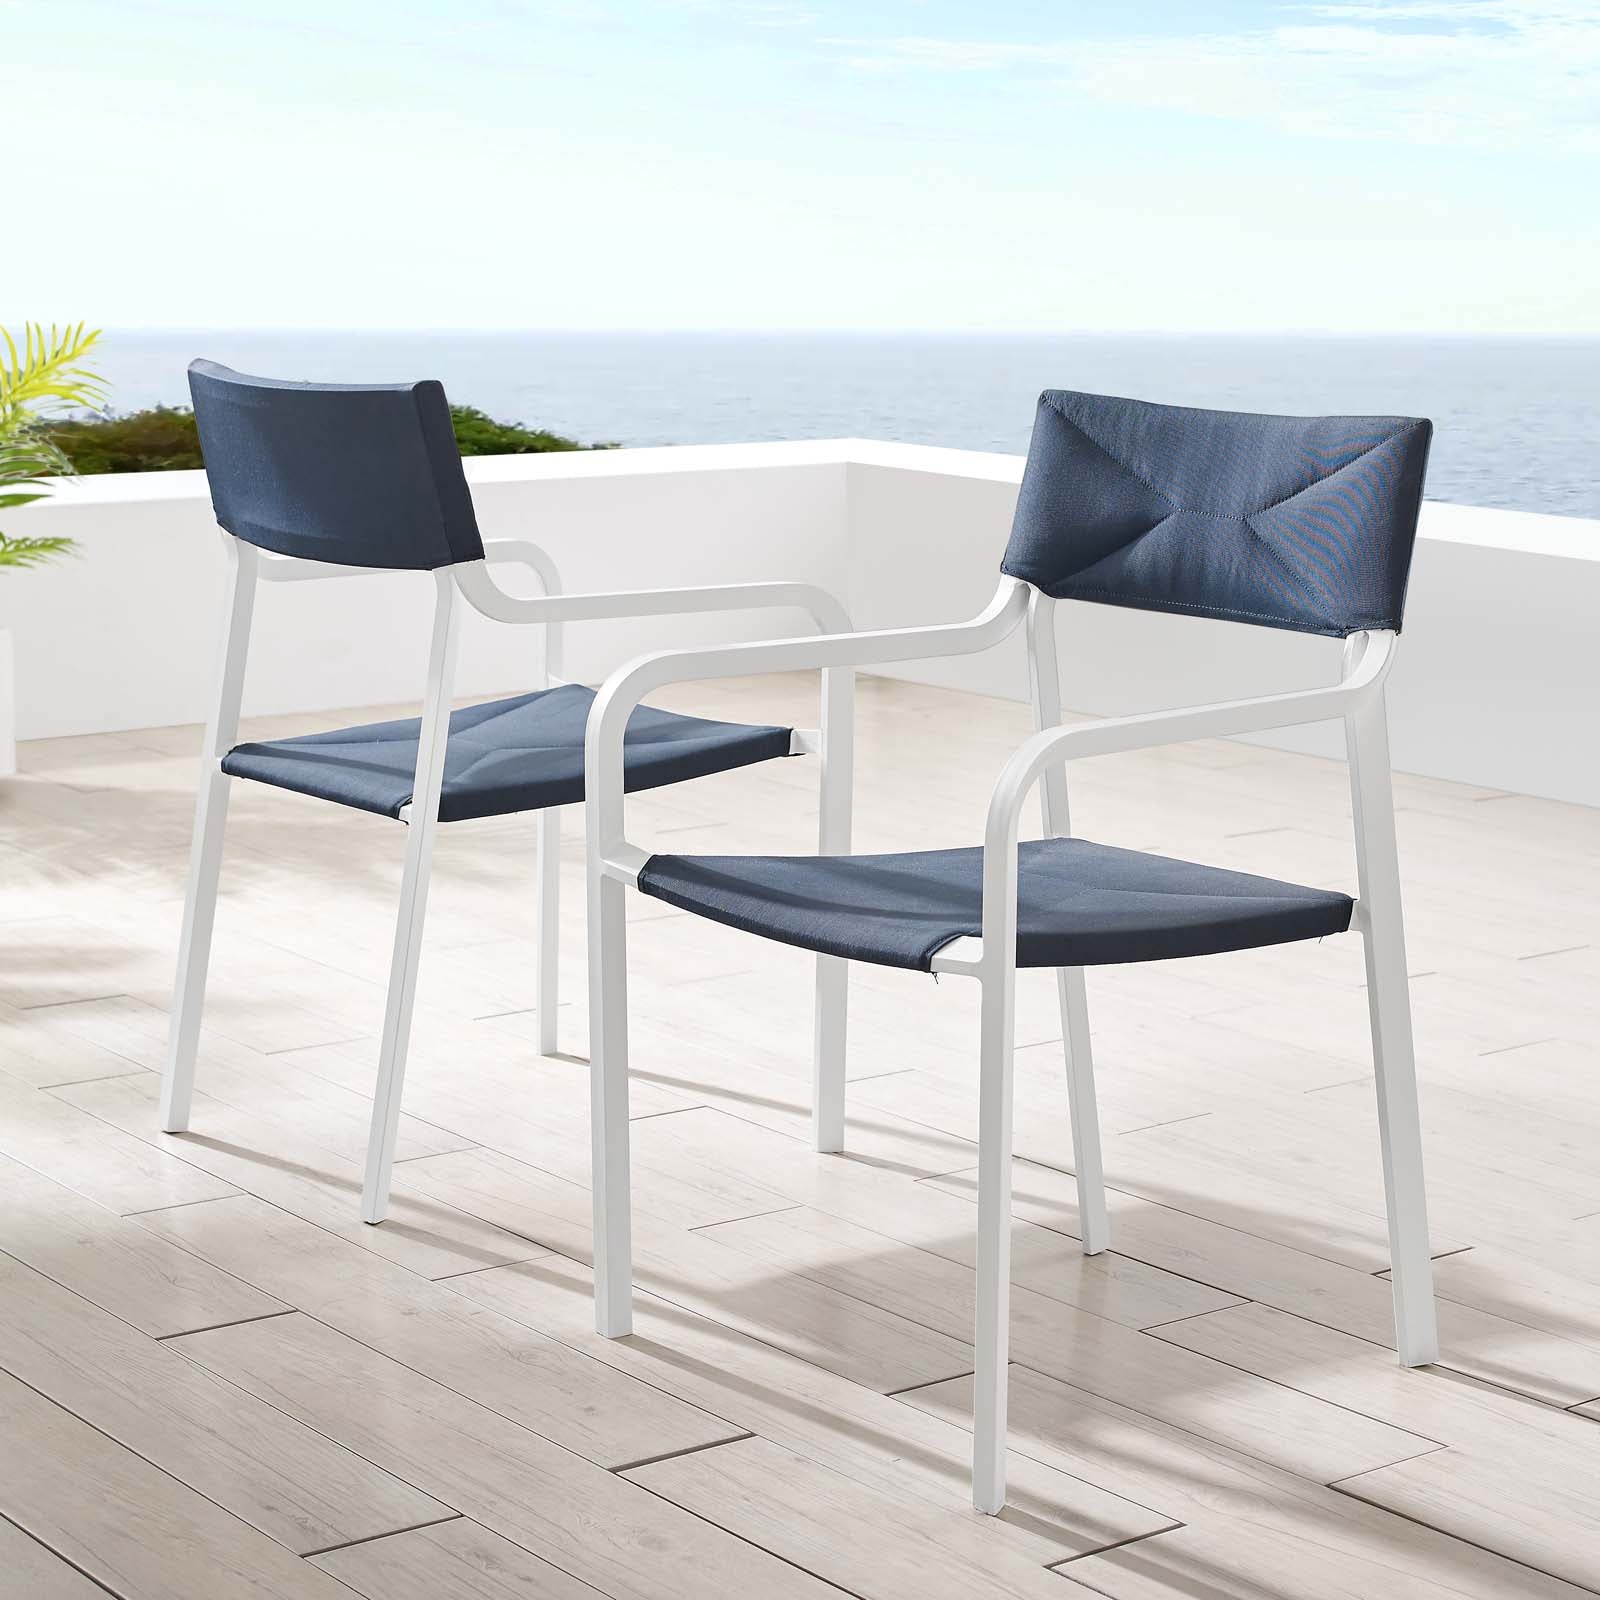 Raleigh Outdoor Patio Aluminum Armchair Set of 2 - East Shore Modern Home Furnishings